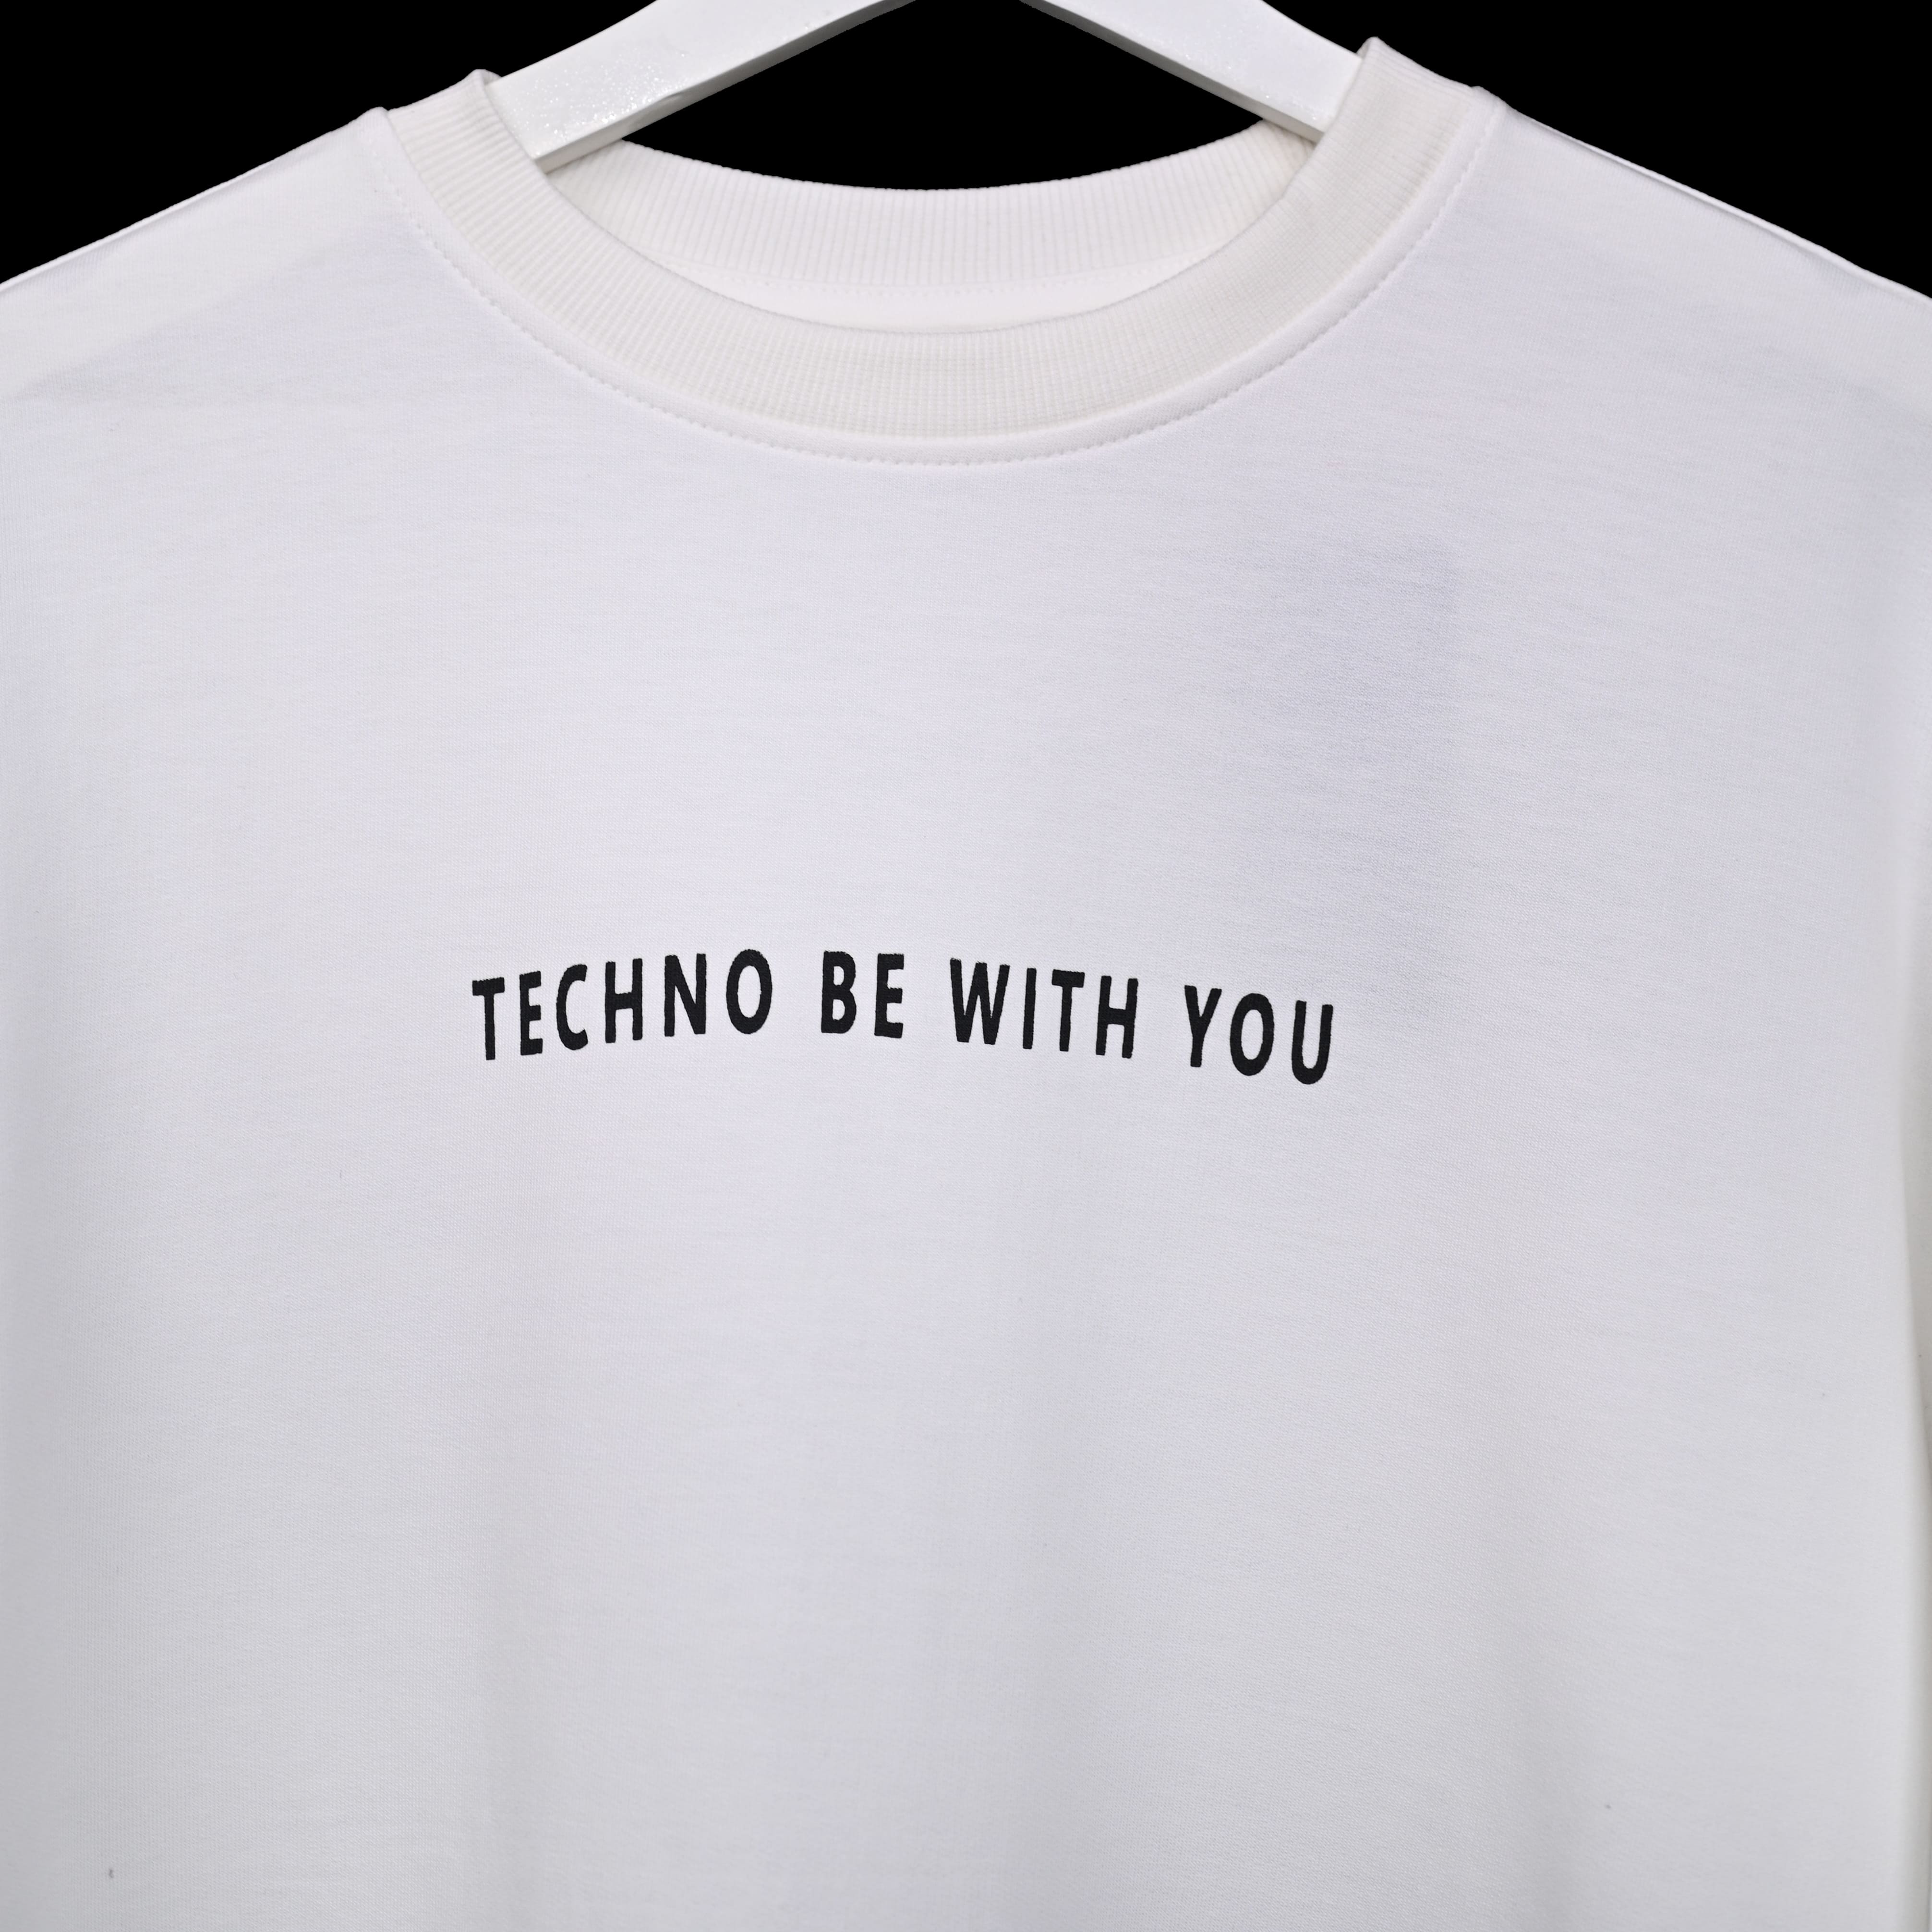 Star Trippy - Techno Be With You_ Clothing  Shop Star Trippy Printed Pure Cotton T-Shirt Online  